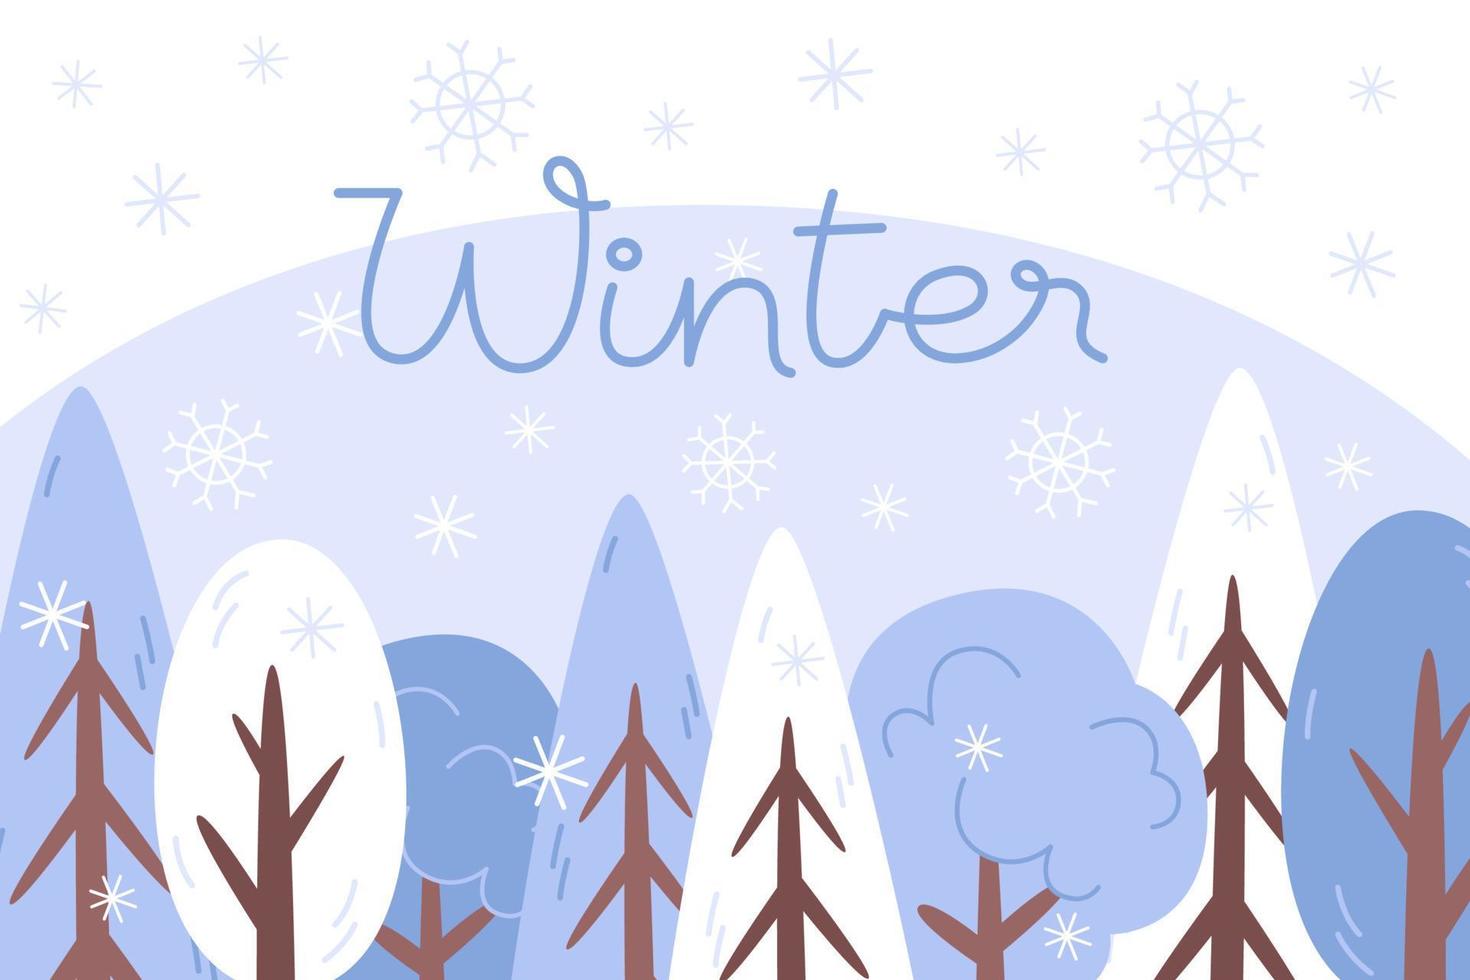 Winter landscape with a snowy forest in a flat style vector